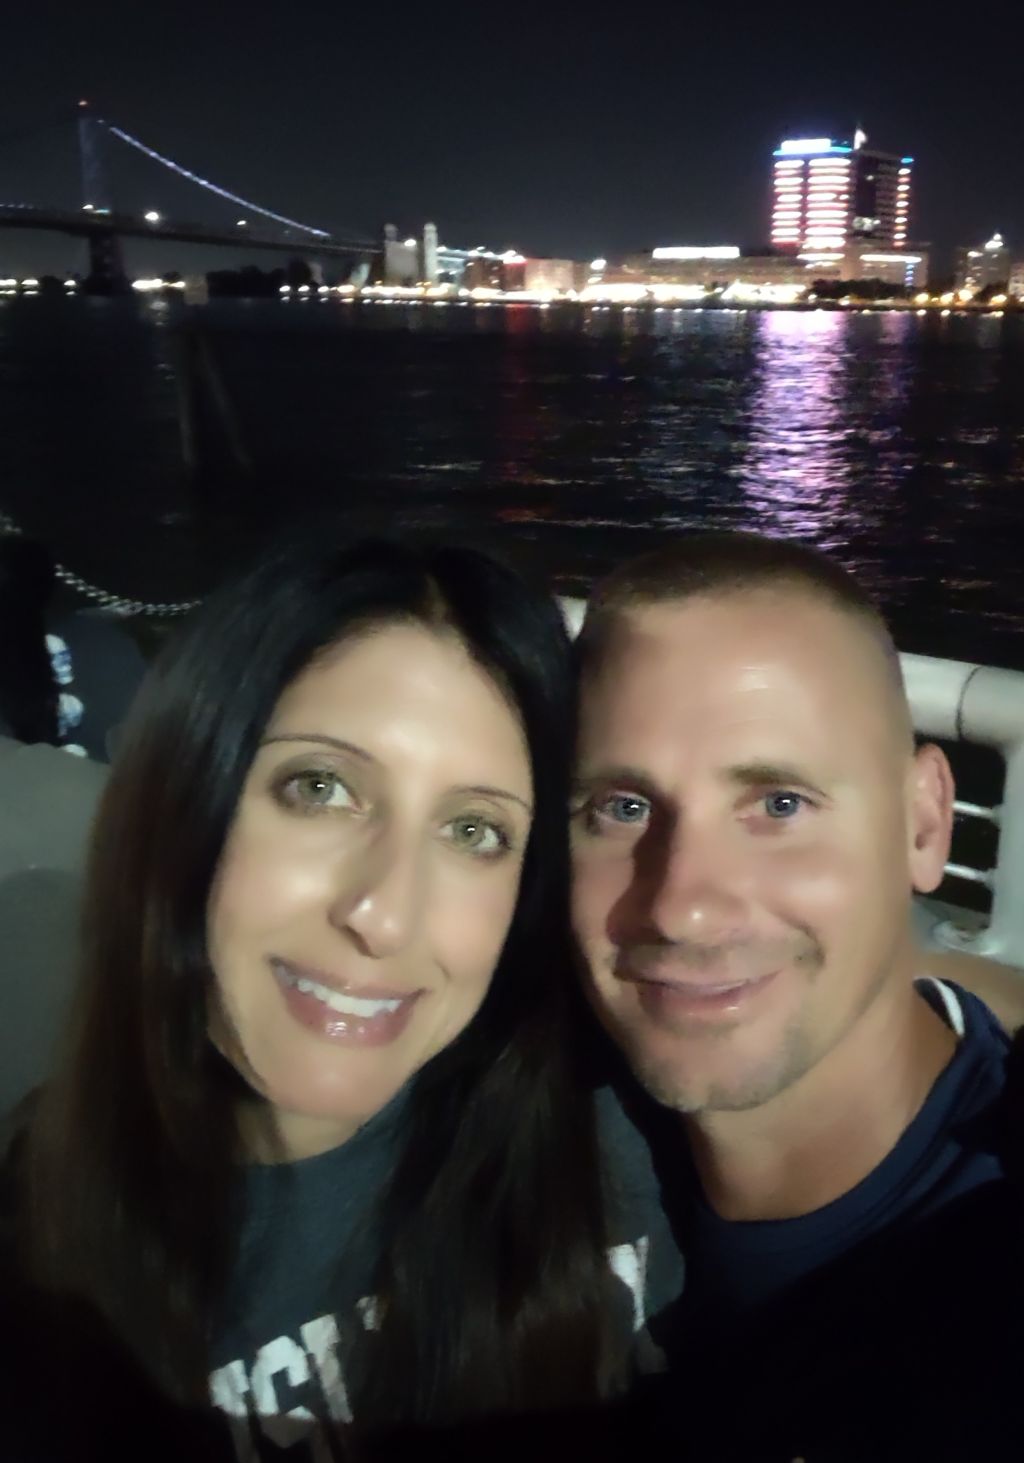 Christian singles laugh together on a river boat cruise at night